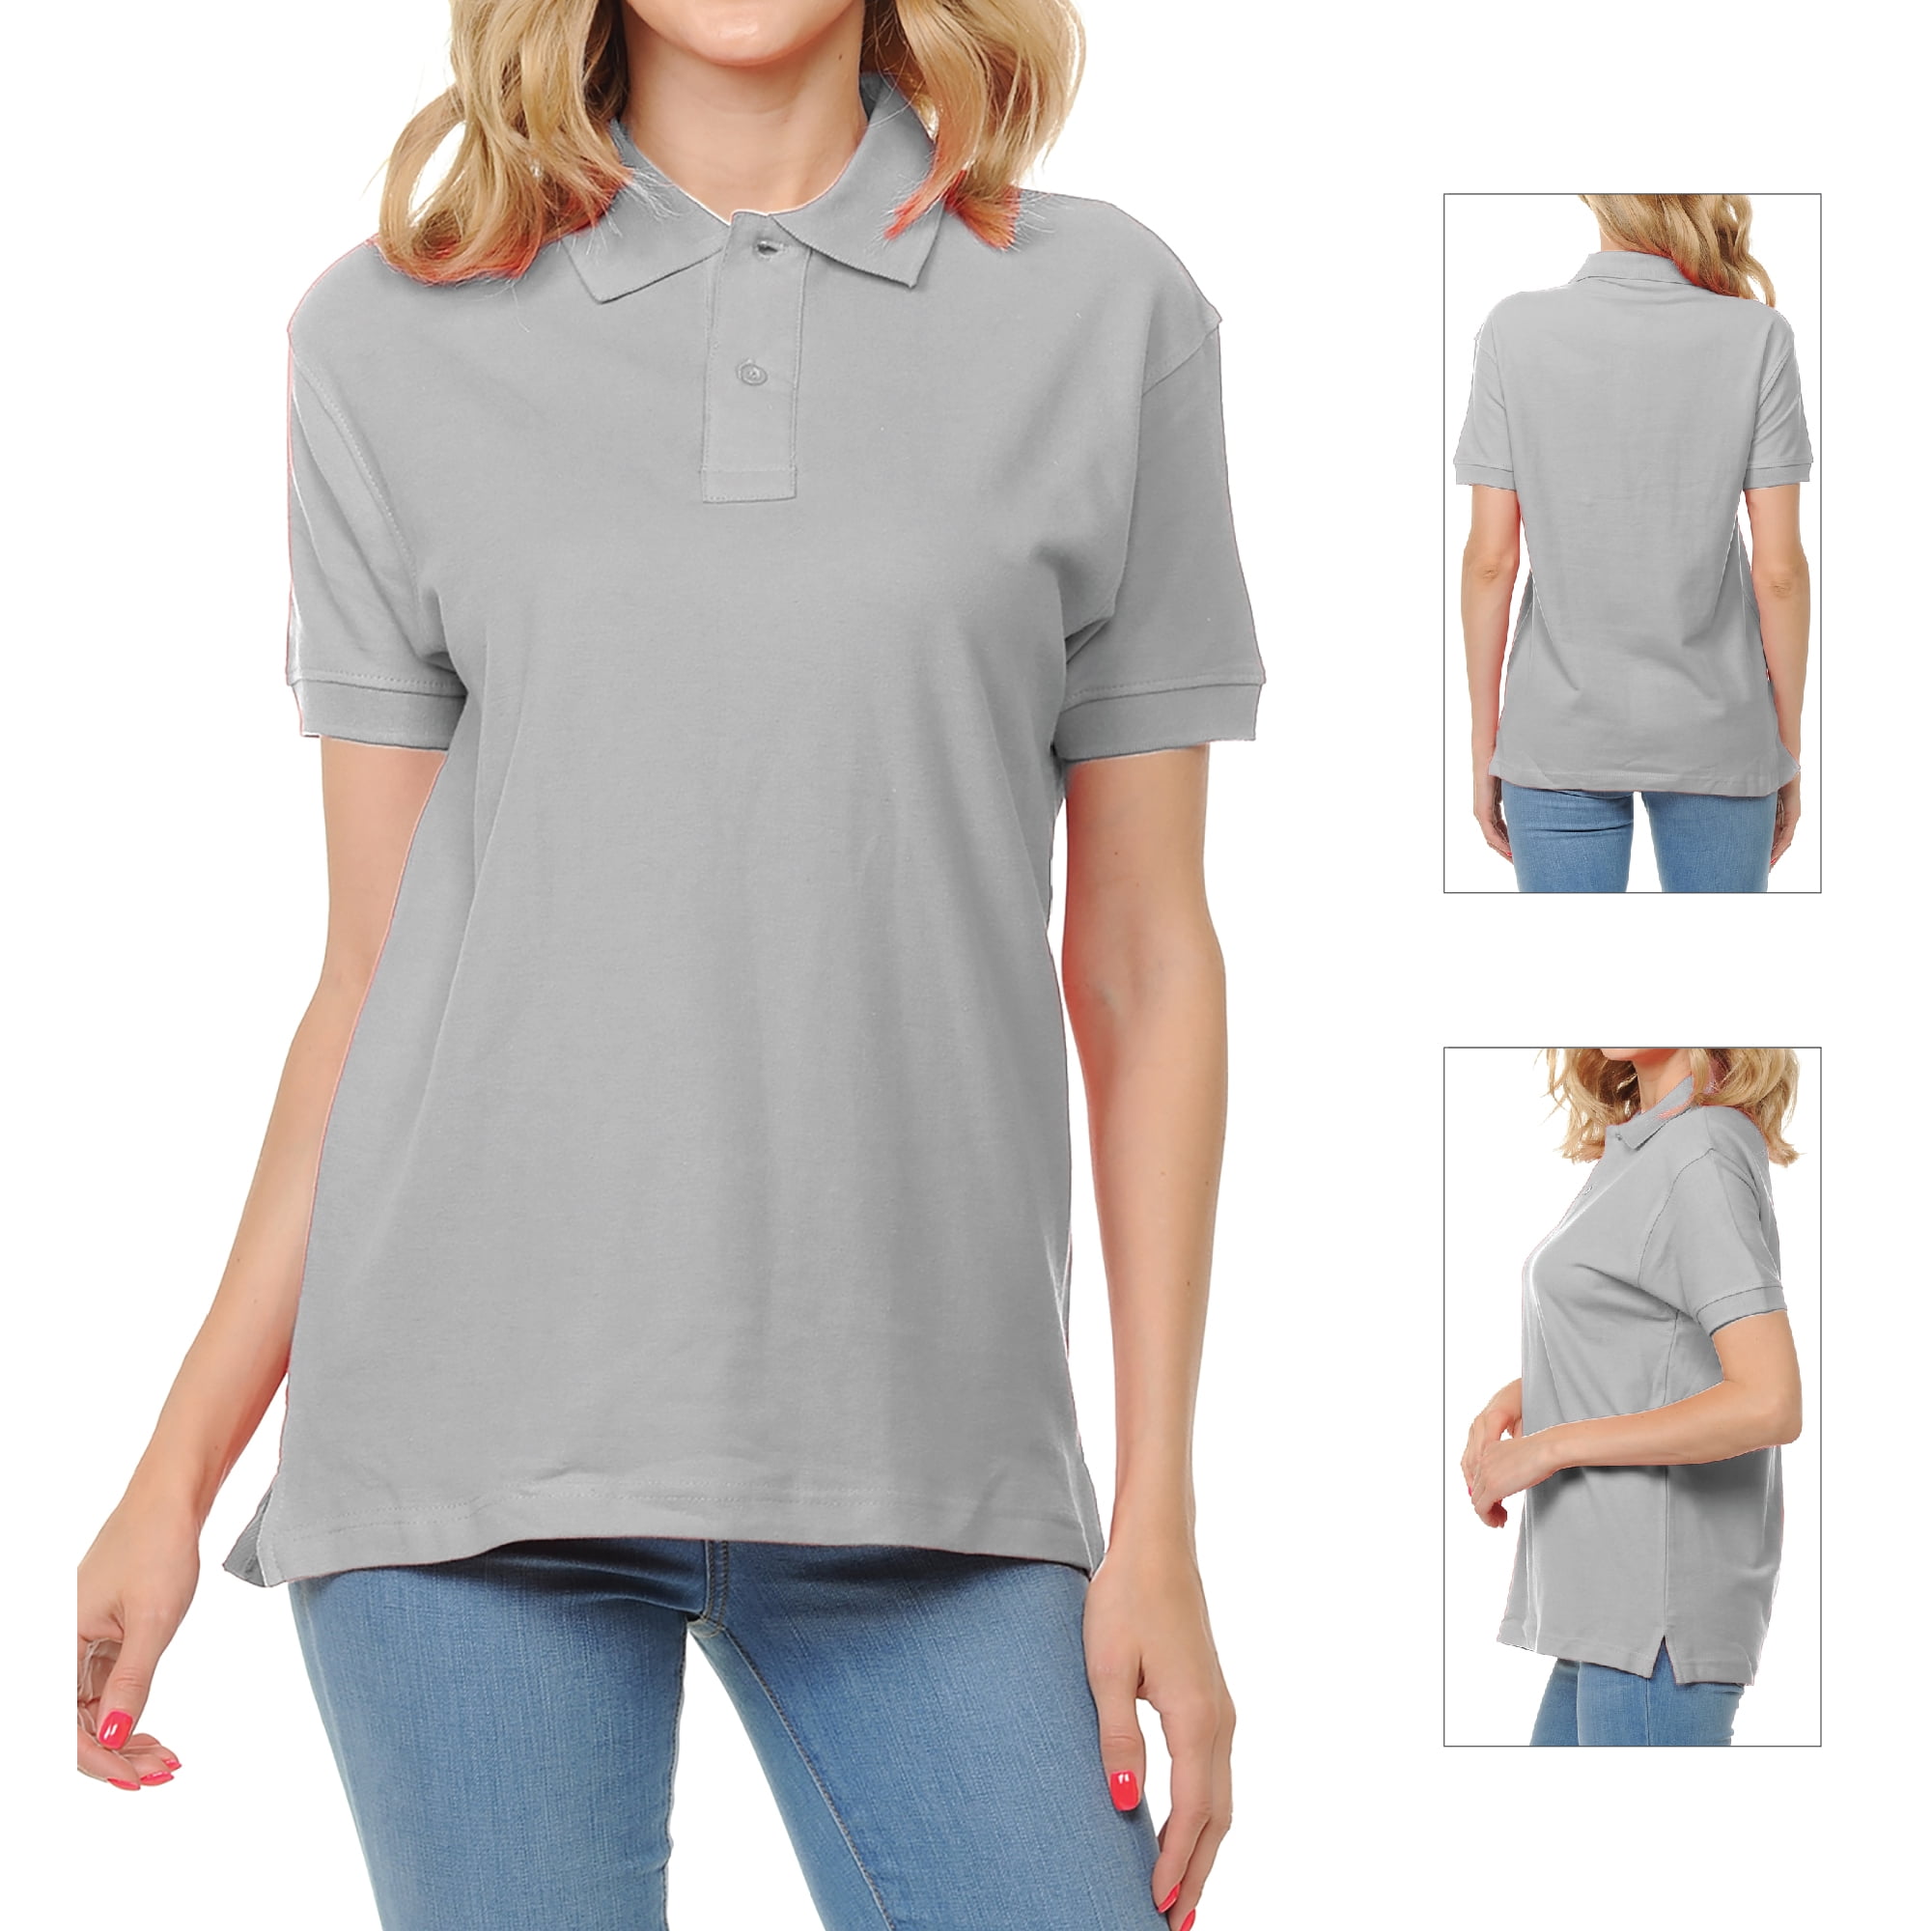 nederdel hul Spis aftensmad Basico (Grey Melange) Polo Collared Shirts For Women 100% Cotton Short  Sleeve Golf Polo Shirts For Women and Juniors - Walmart.com